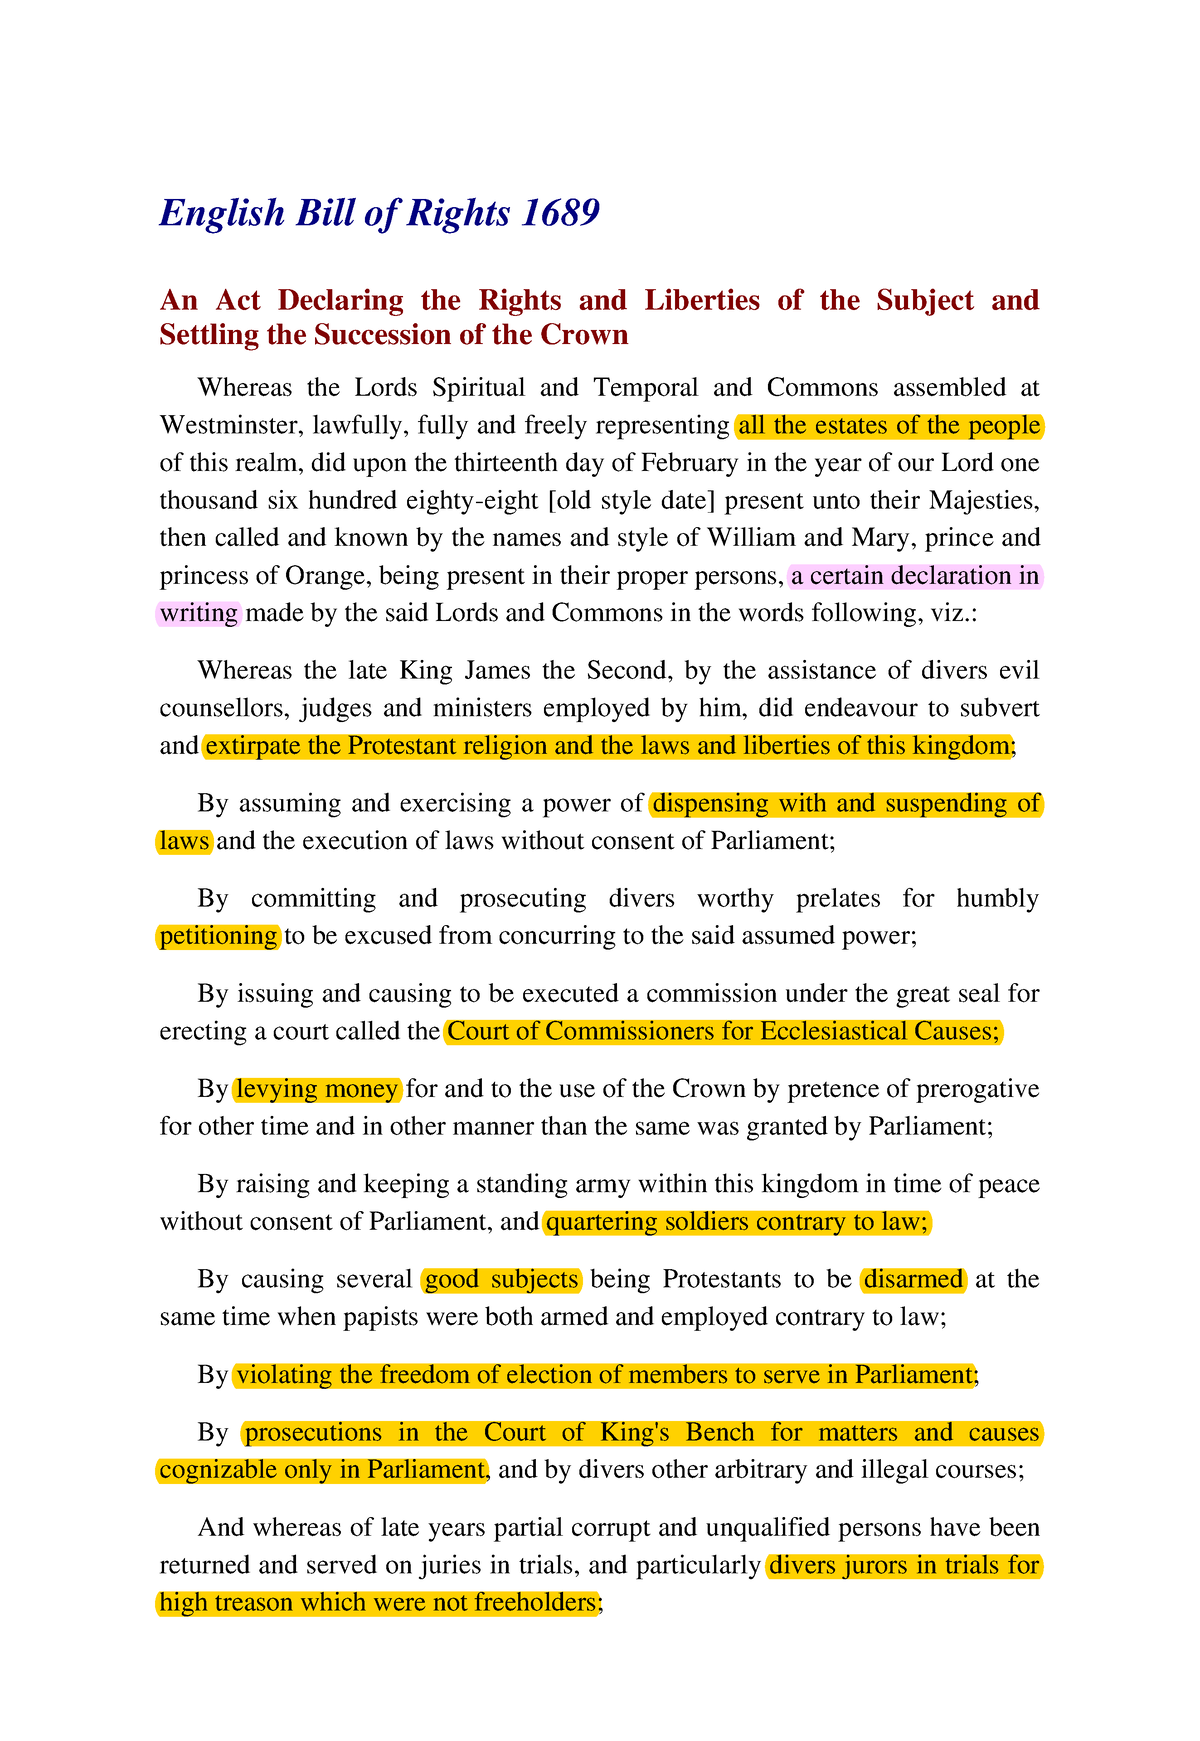 2b-doc-bill-of-rights-1689-english-bill-of-rights-1689-an-act